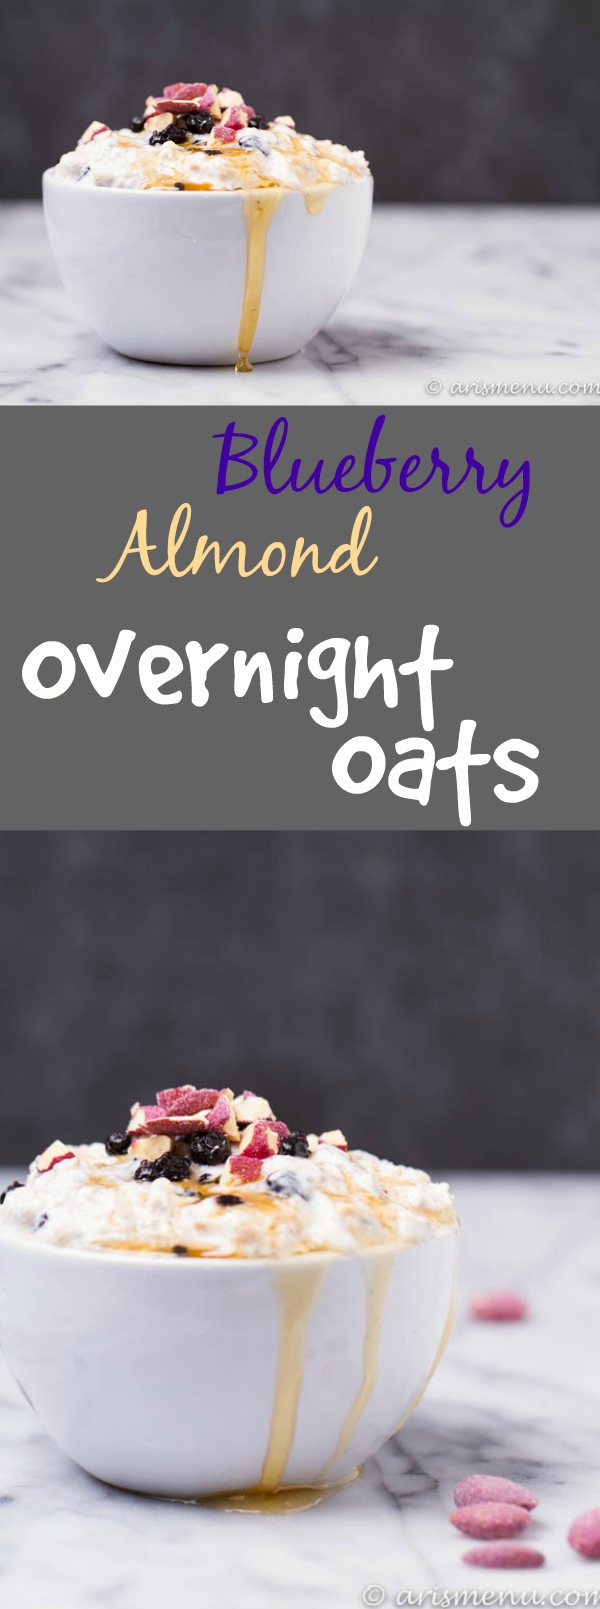 Blueberry Almond Overnight Oats: A creamy, healthy, protein-packed breakfast loaded with flavor and ready for you when you wake up! Take the prep work out of your morning and start your day off right.